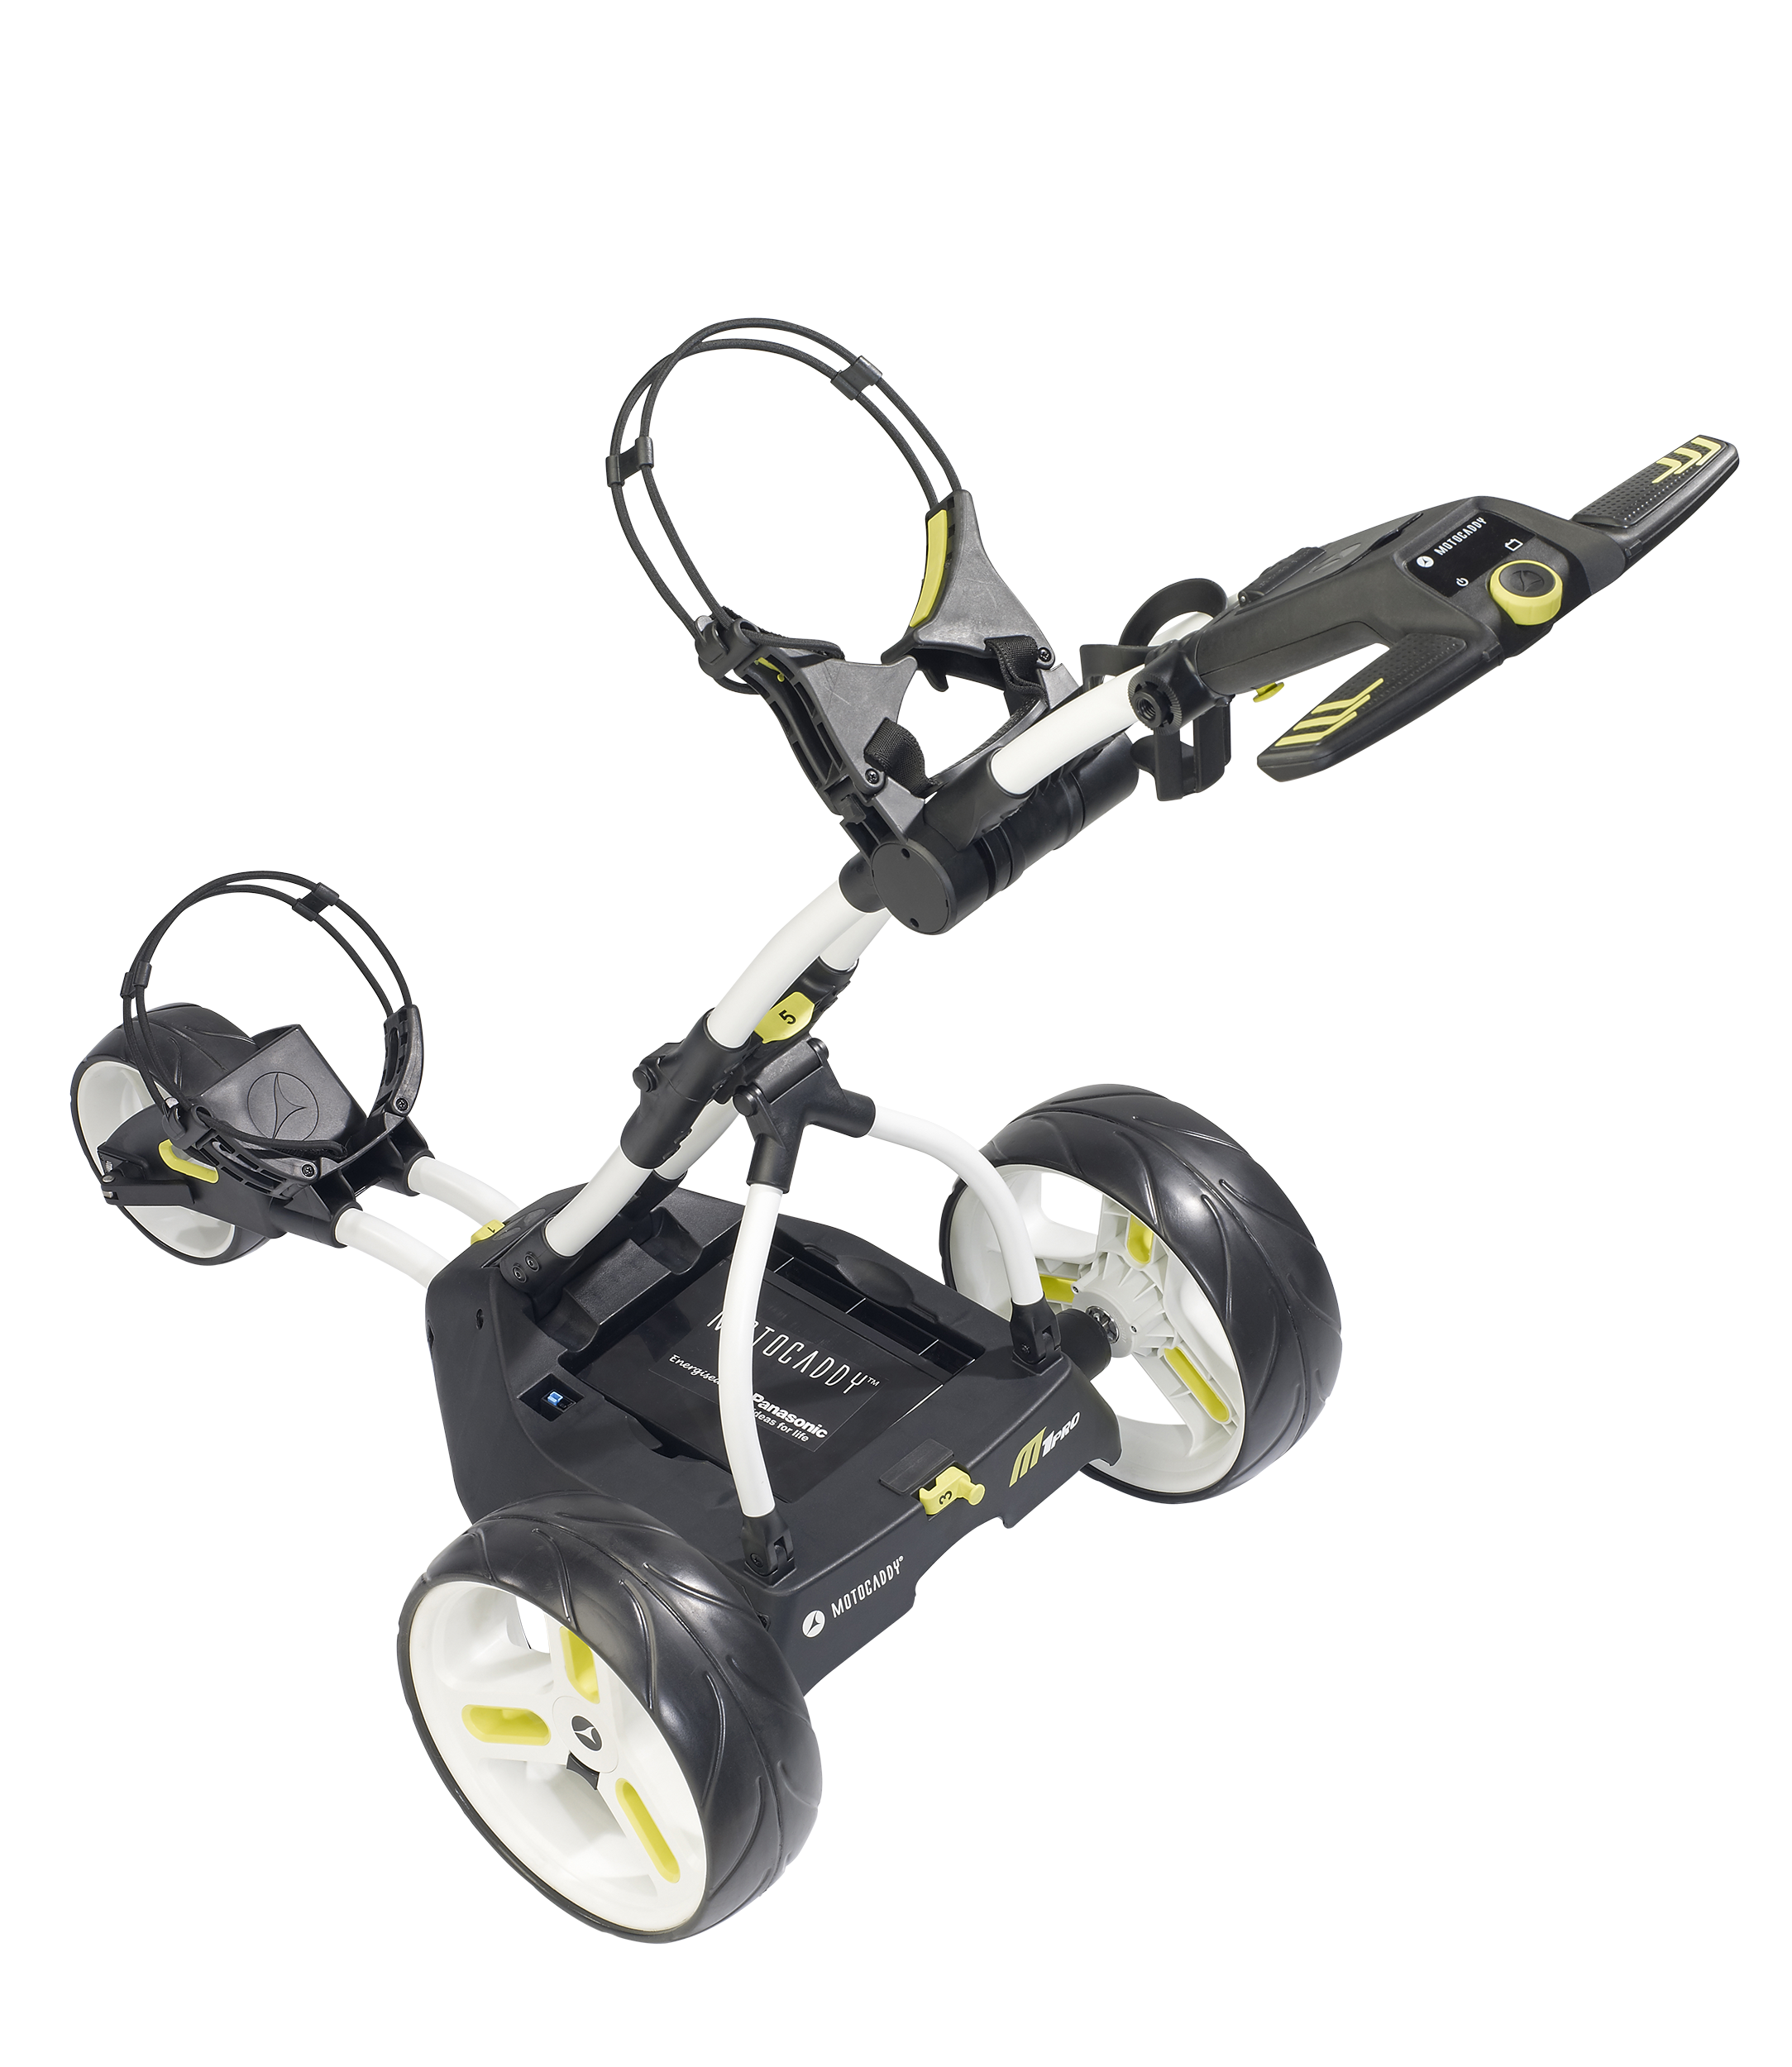 Review: Motocaddy M1 Pro